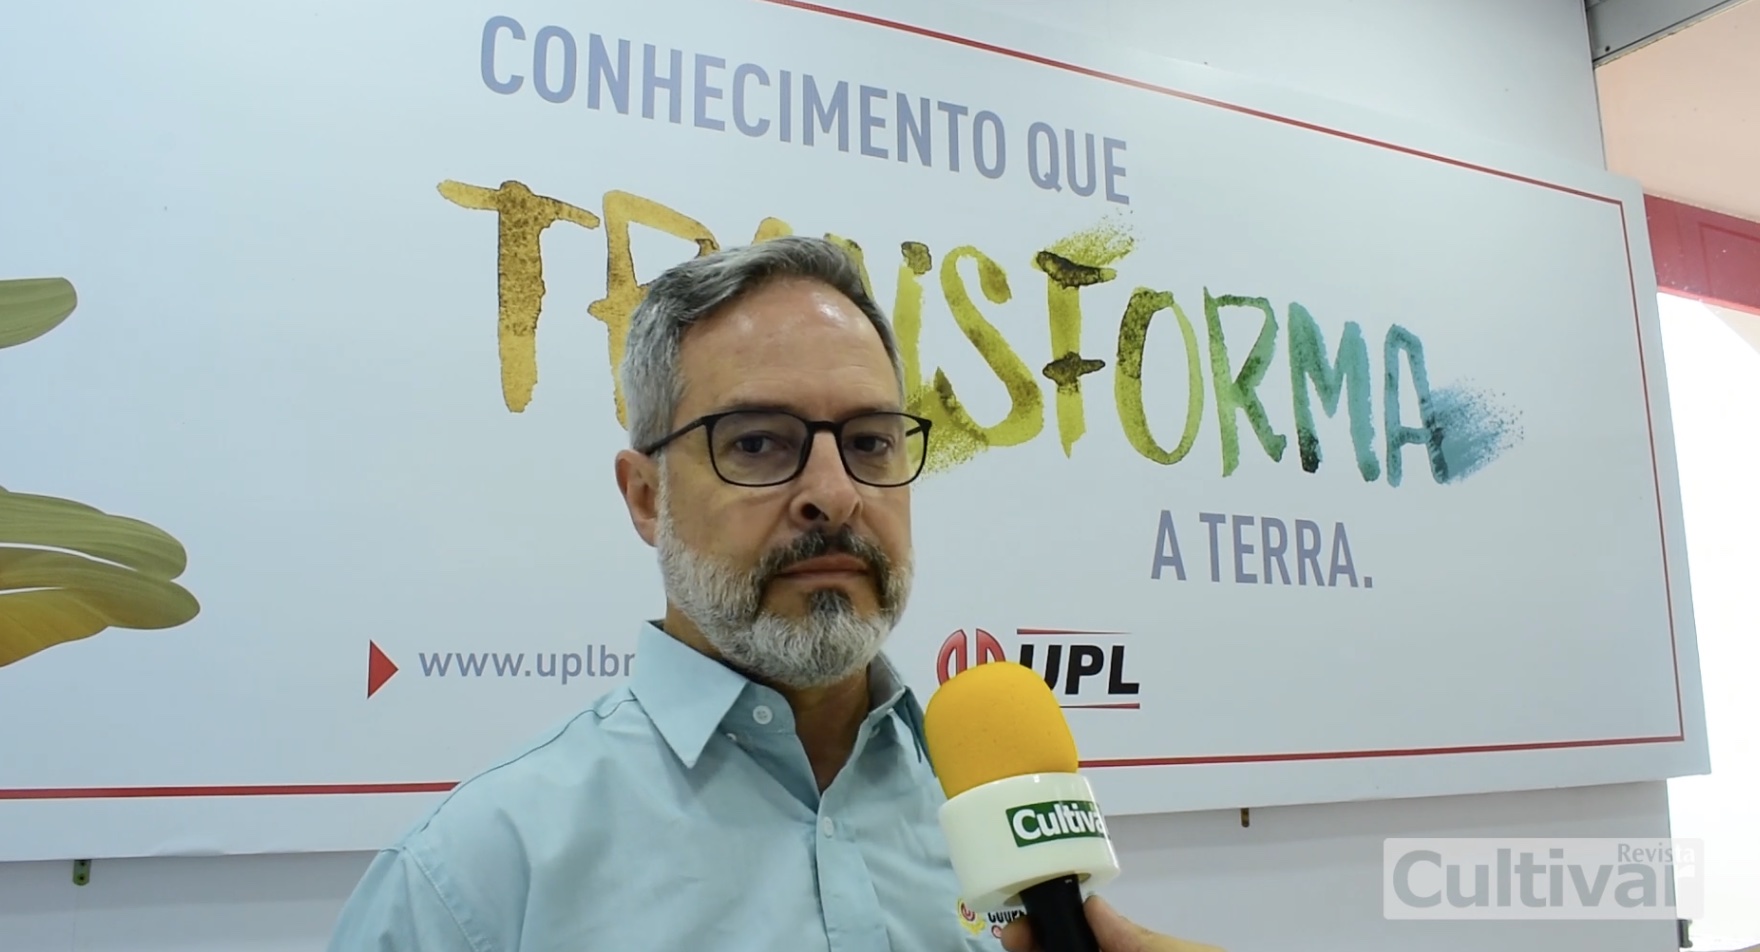 According to Kynetec, UPL is the main supplier of insecticides for soybeans in Brazil